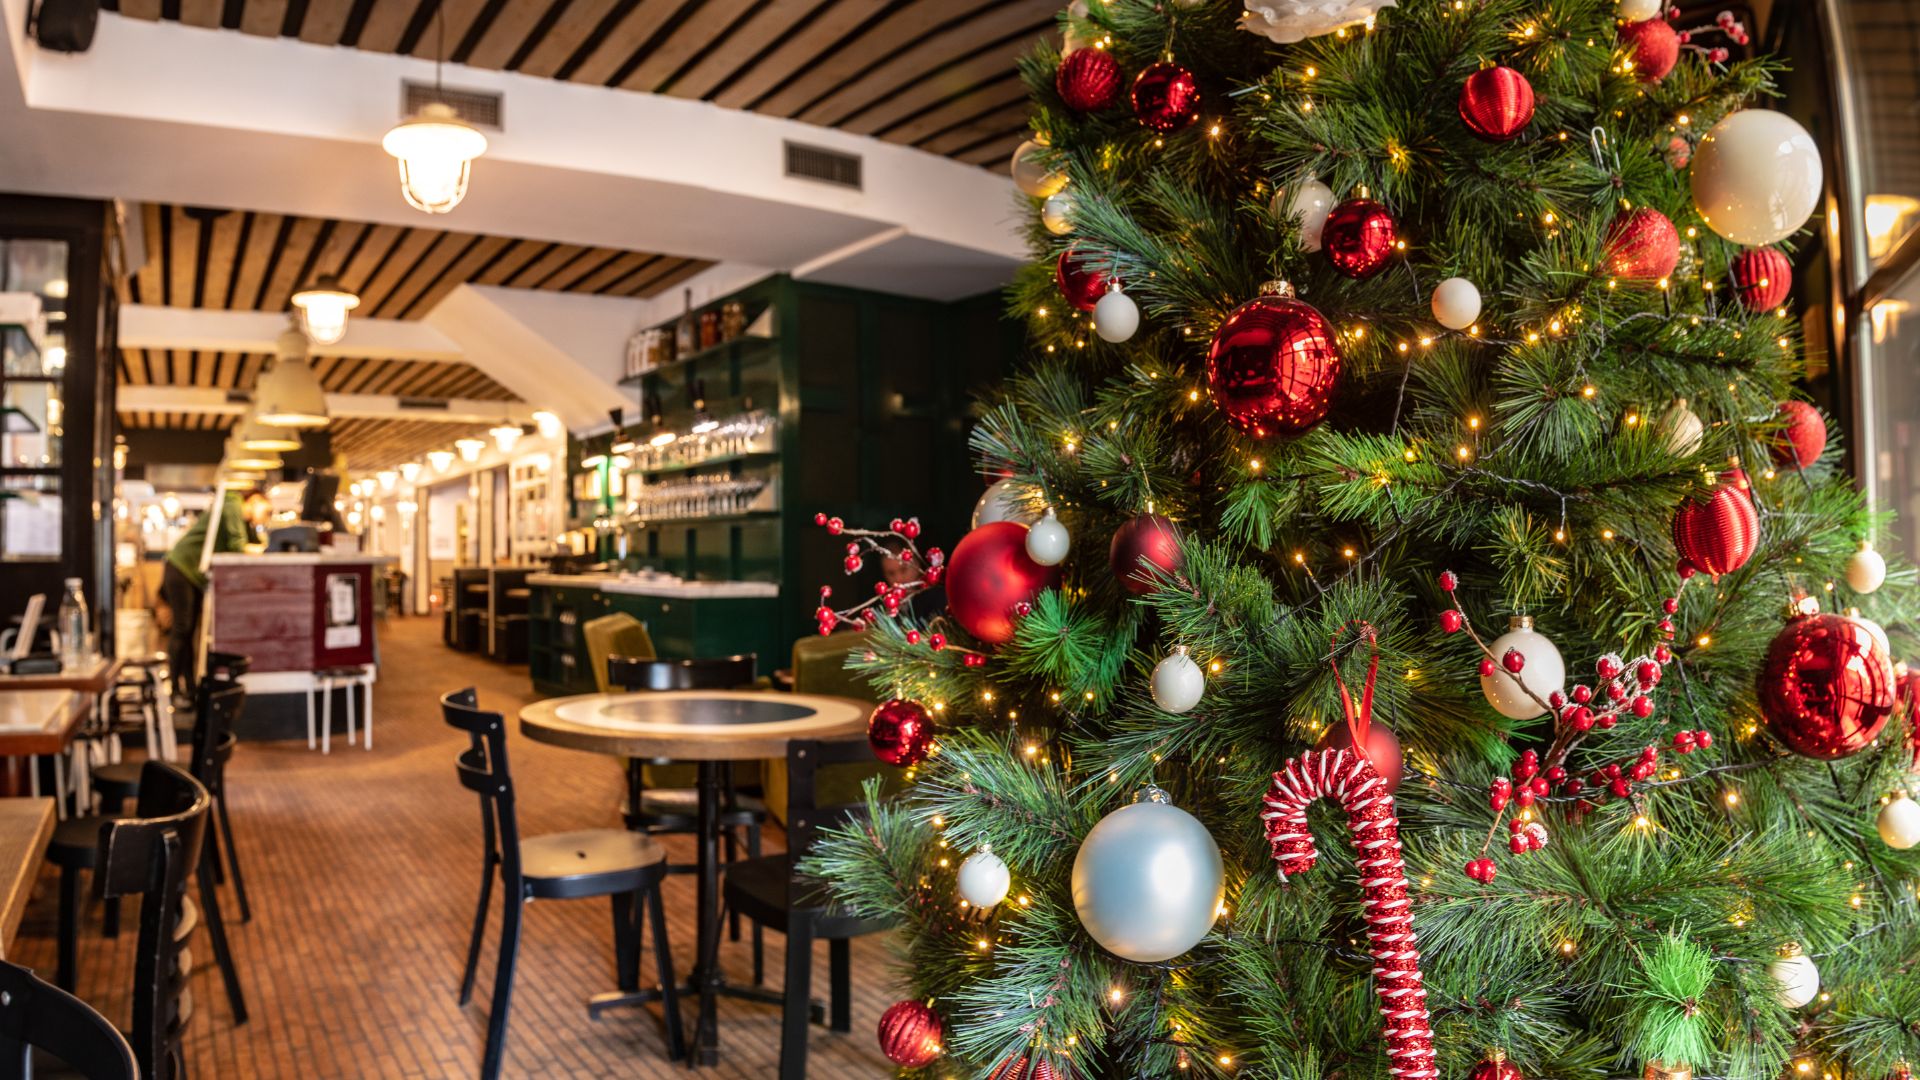 Why Vouchers and Pre-Orders are Key to More Bookings (and Less Stress) this Festive Season